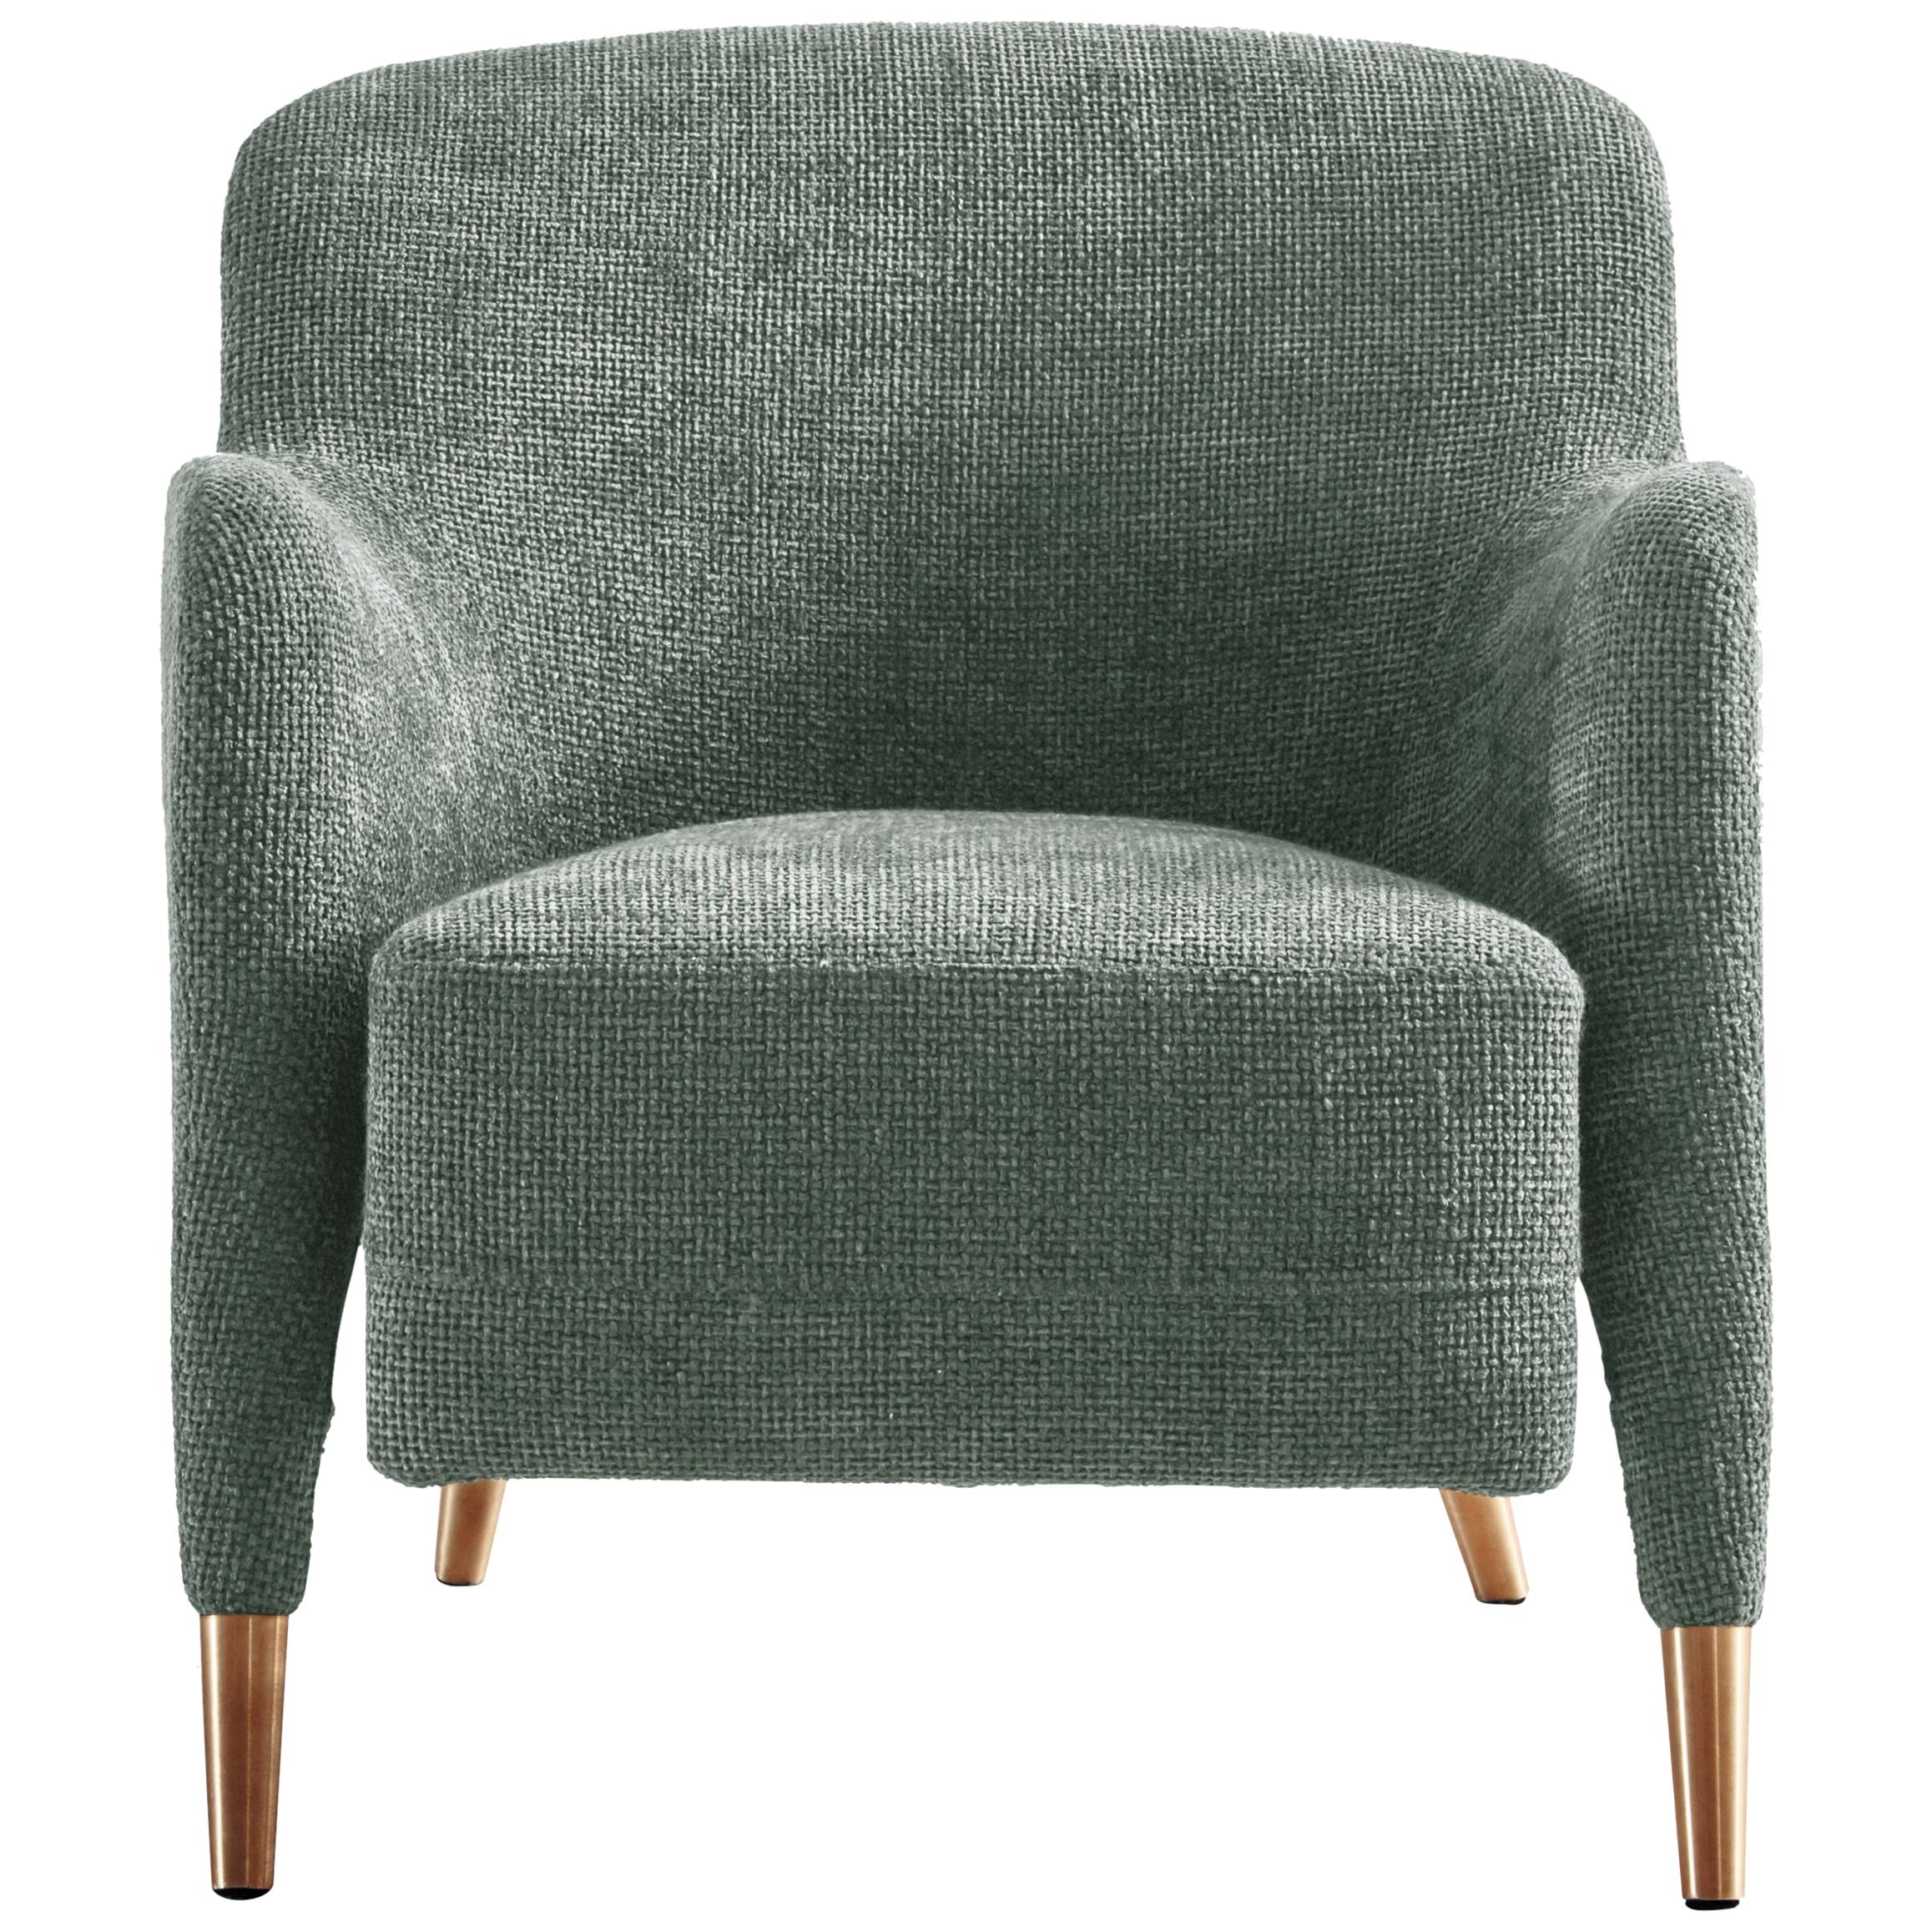 Armchair in Linen Molteni&C by Gio Ponti Design D.151.4 - made in Italy